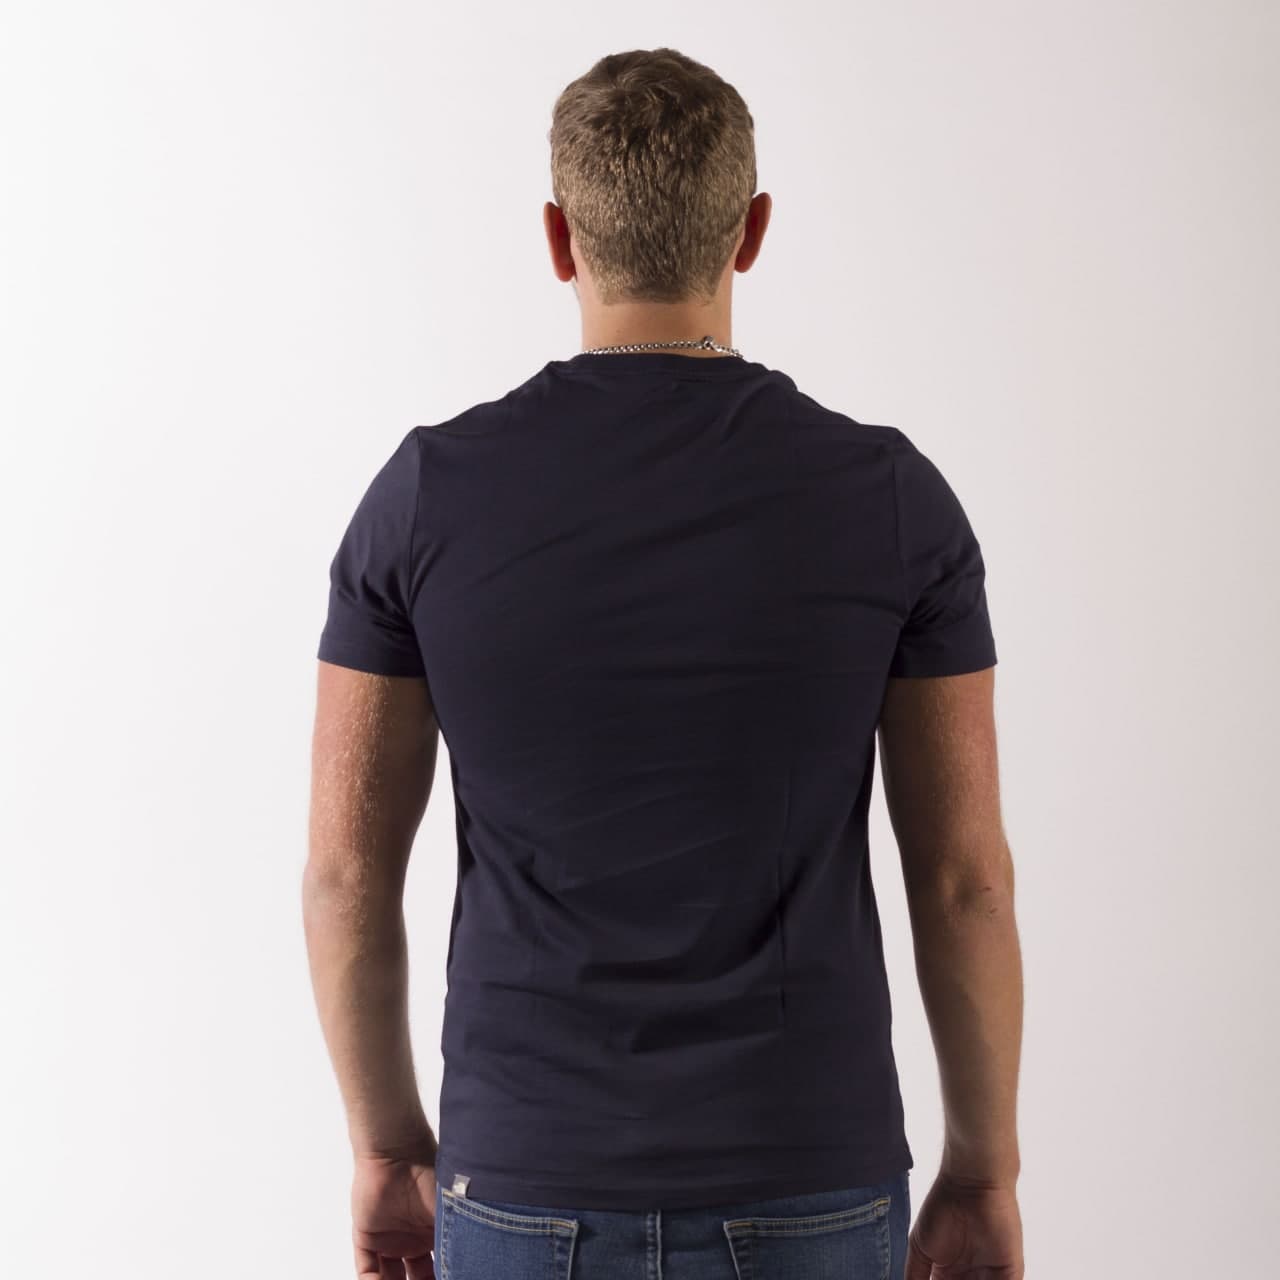 the north face sheffield t shirt